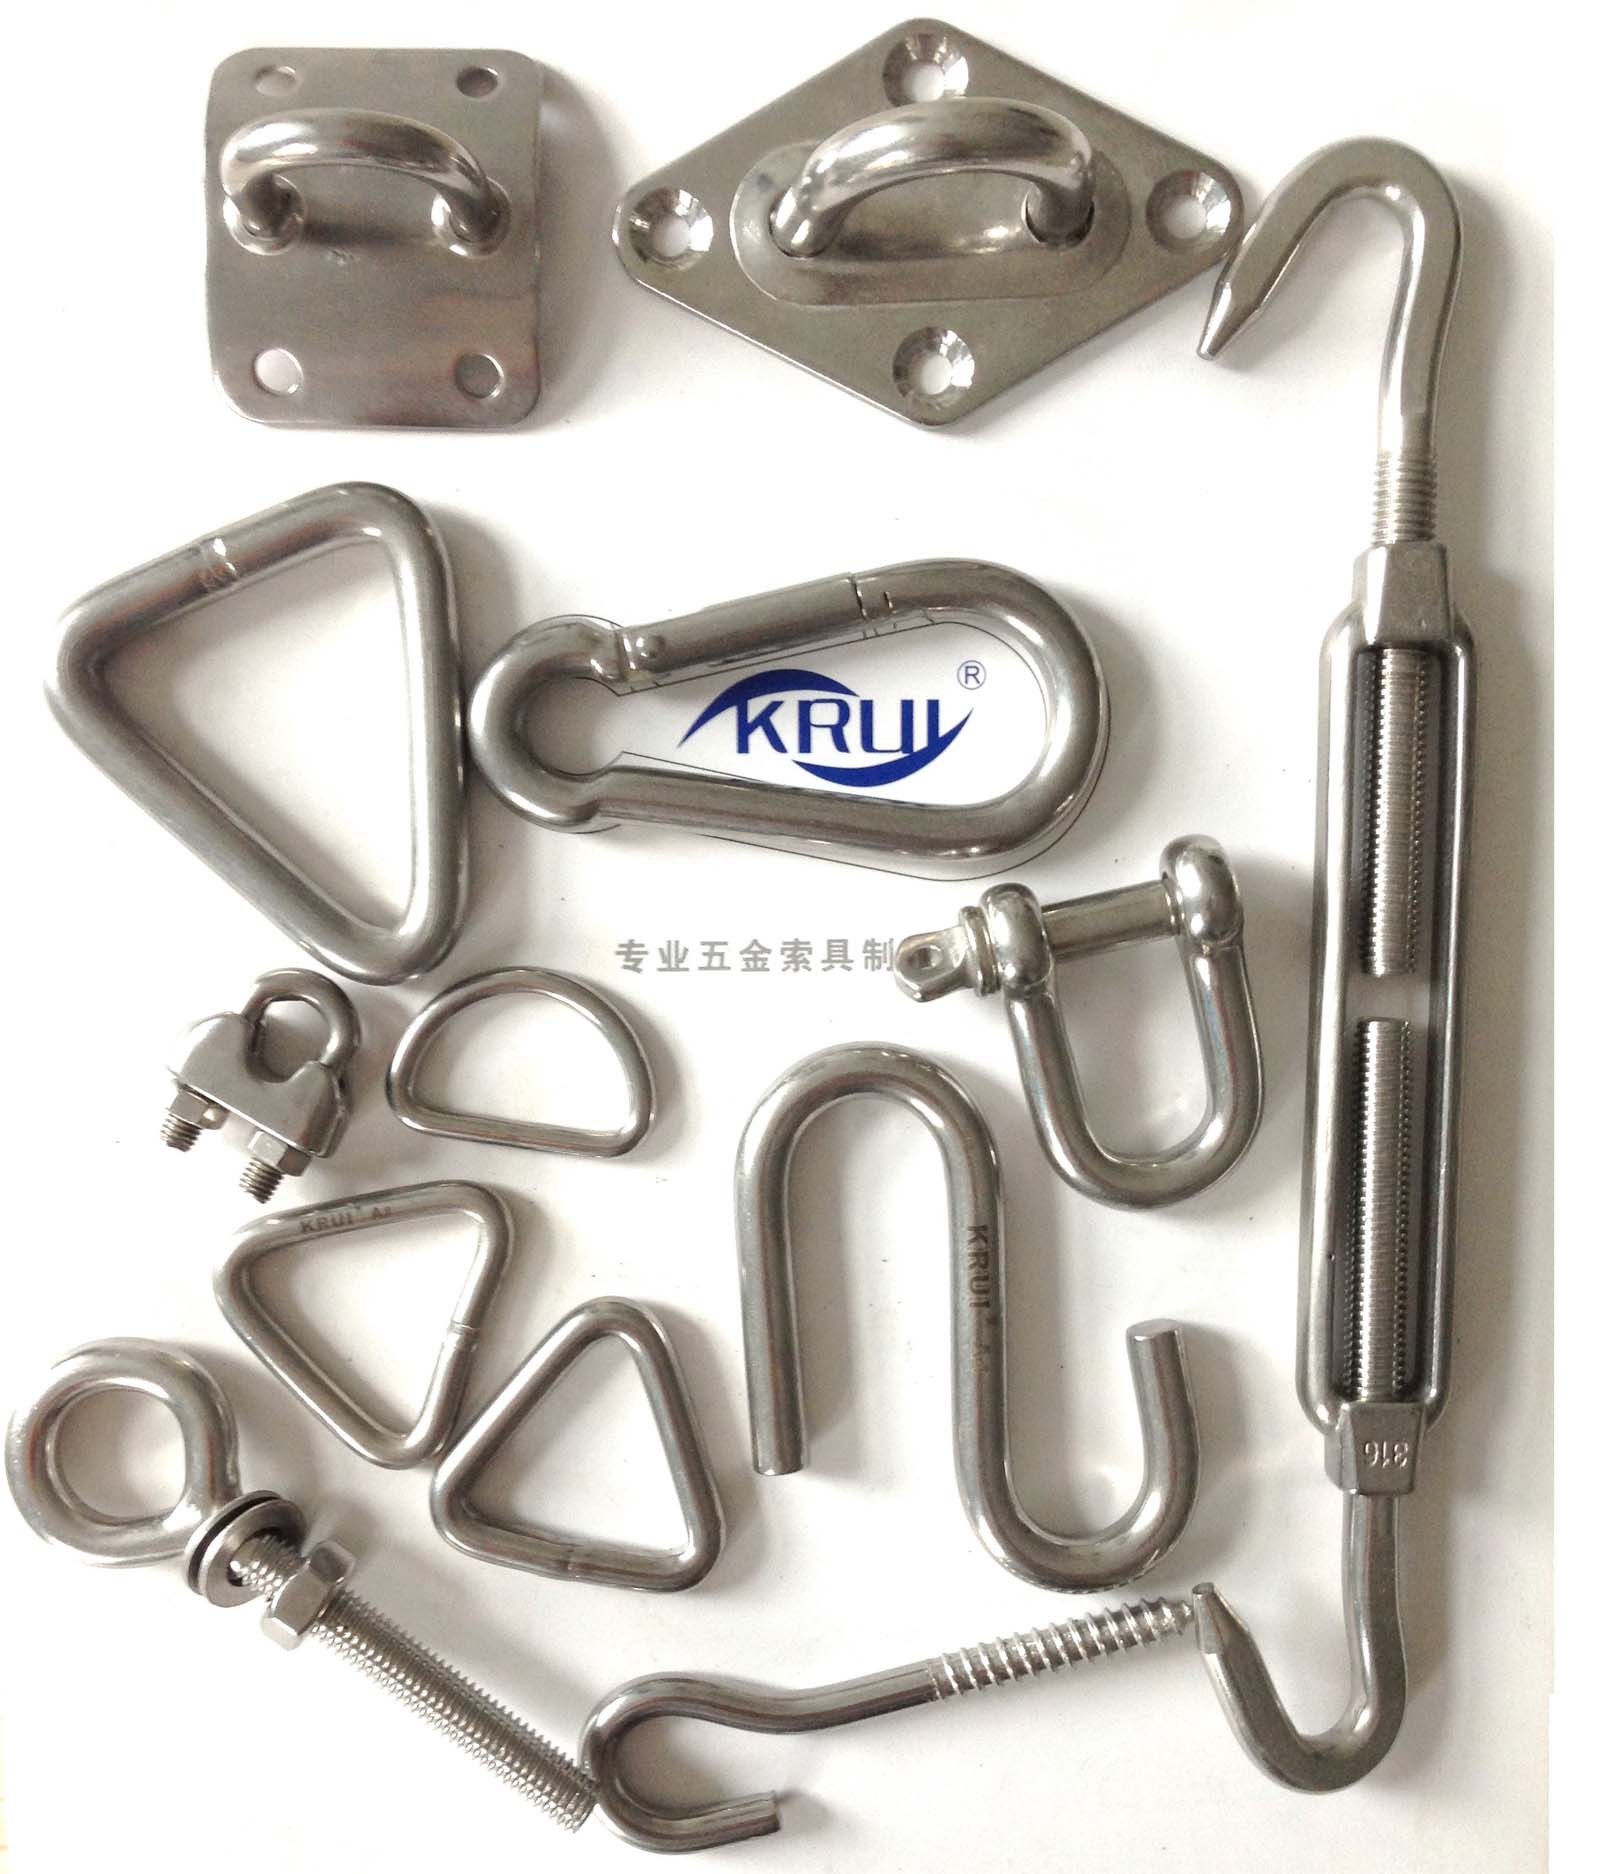 All Kinds of Rigging Hardware